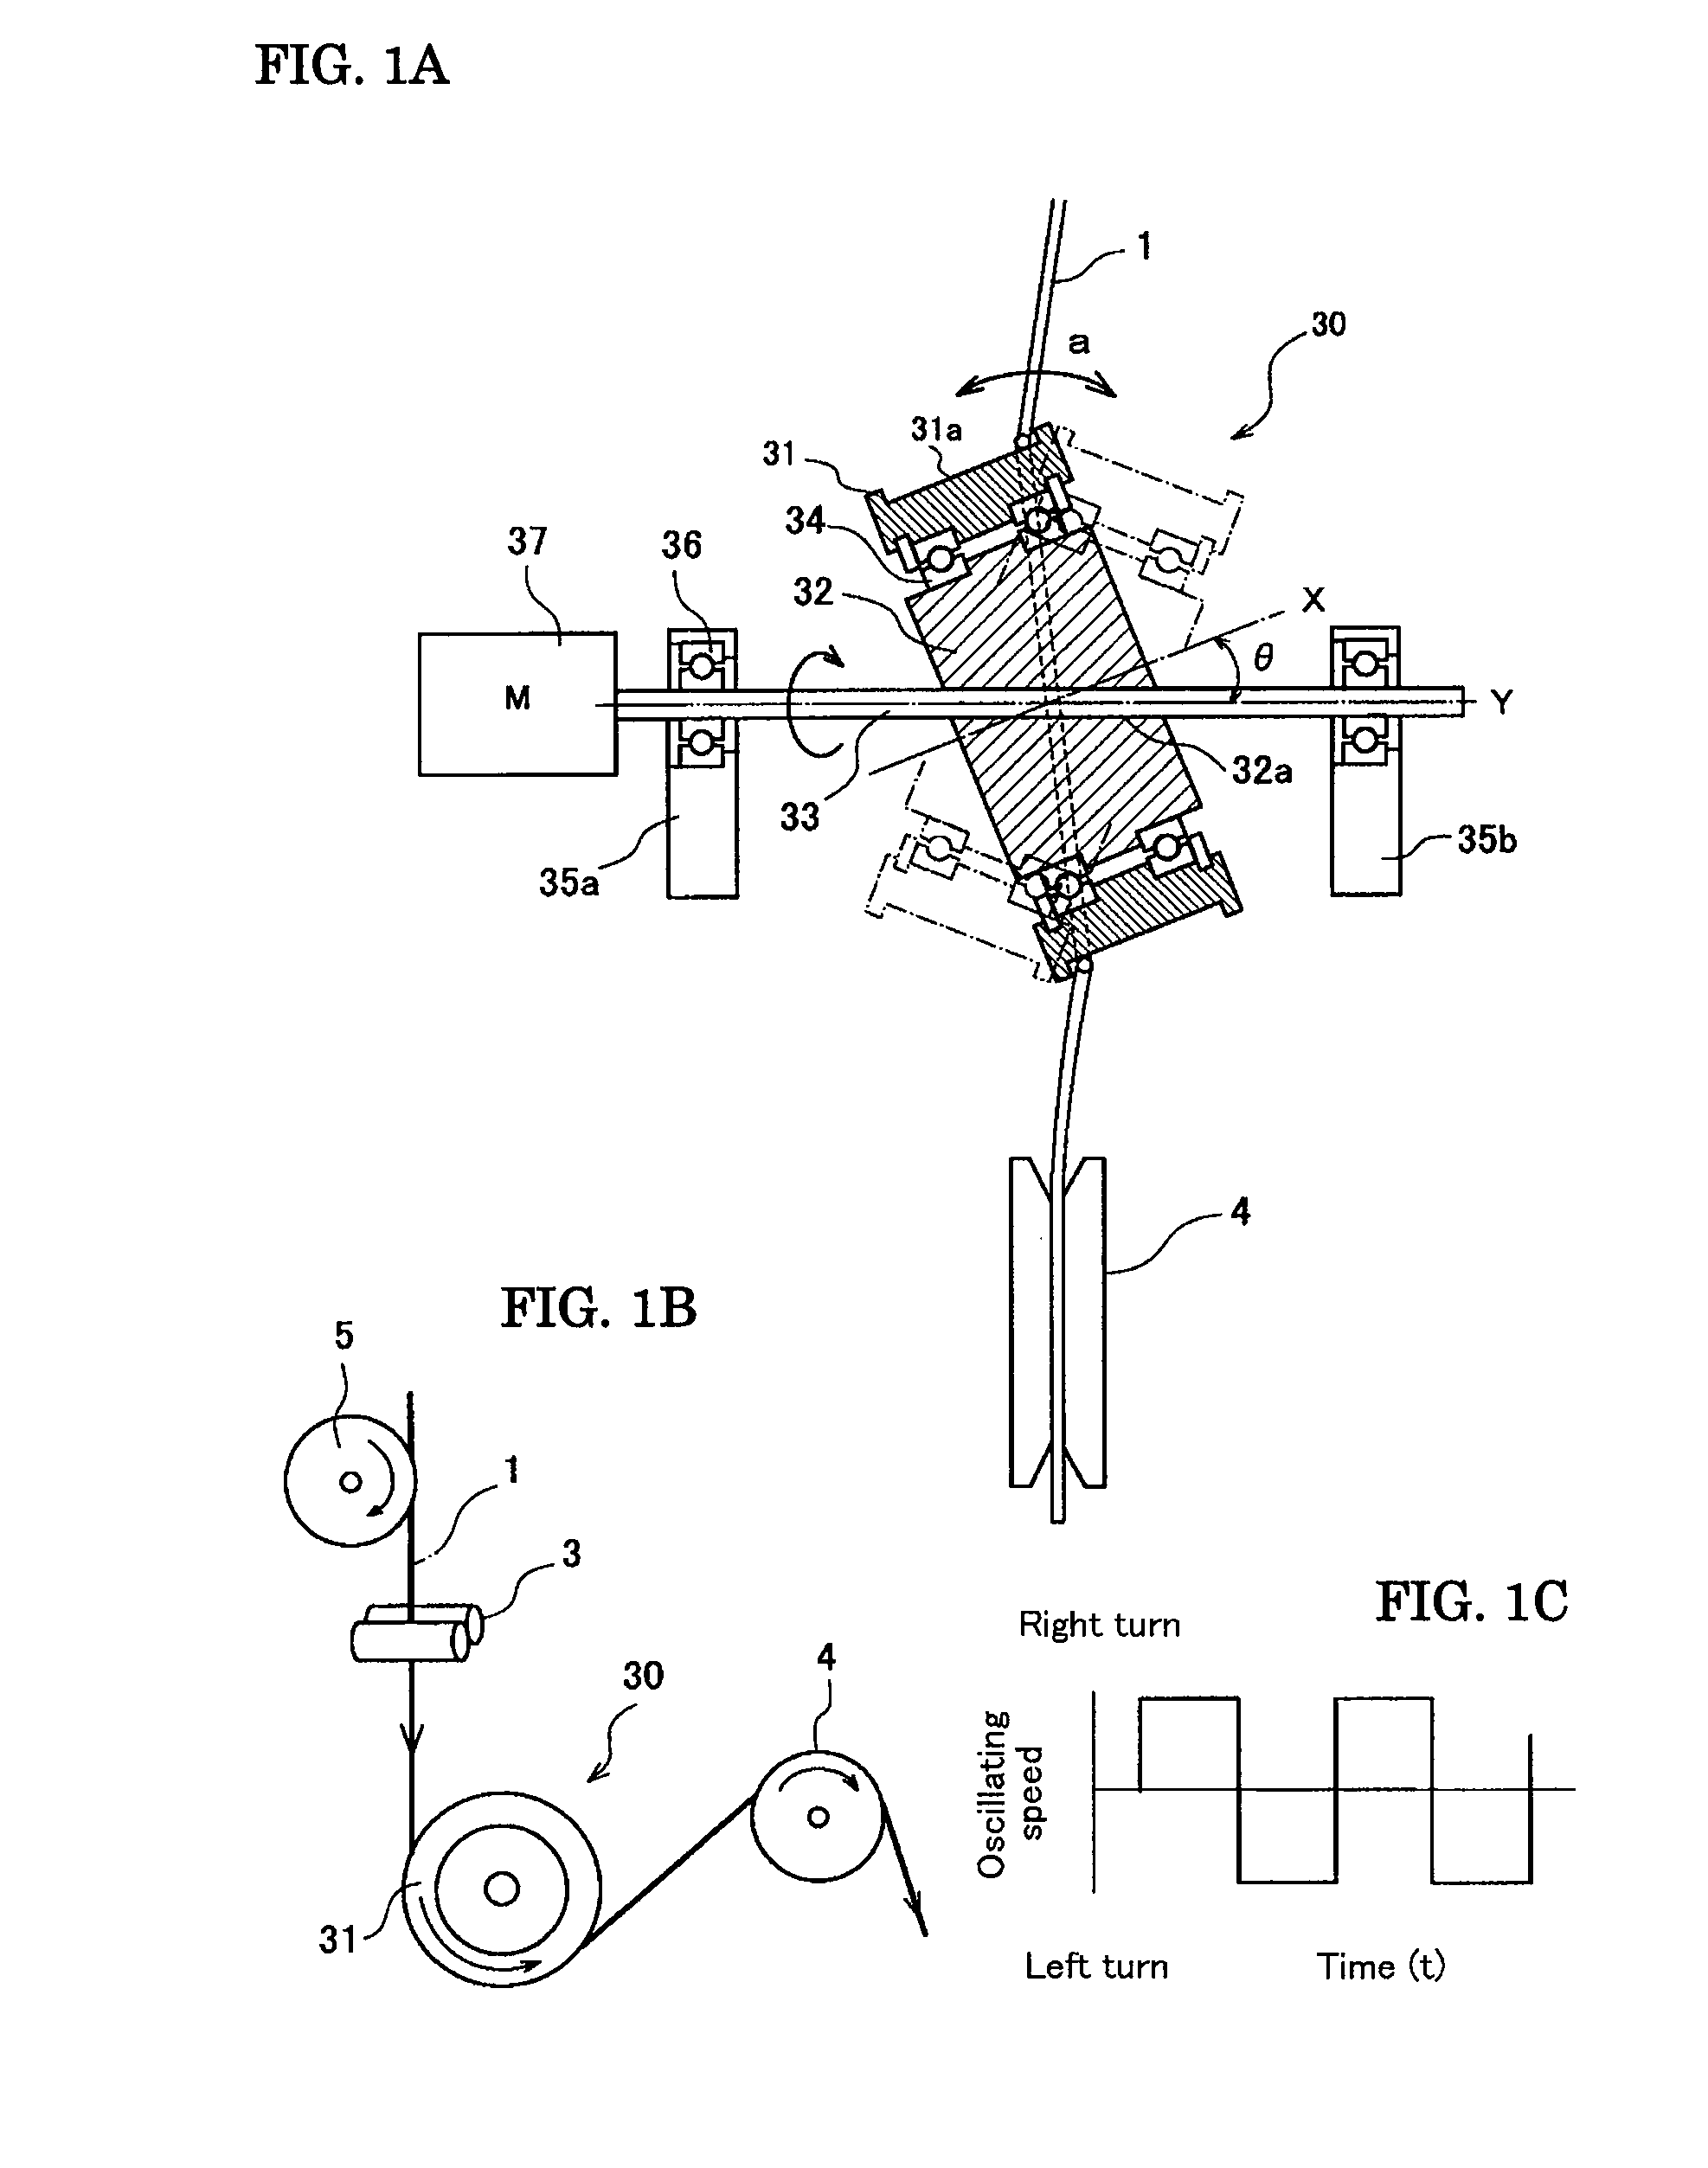 Equipment and method for manufacturing an optical fiber